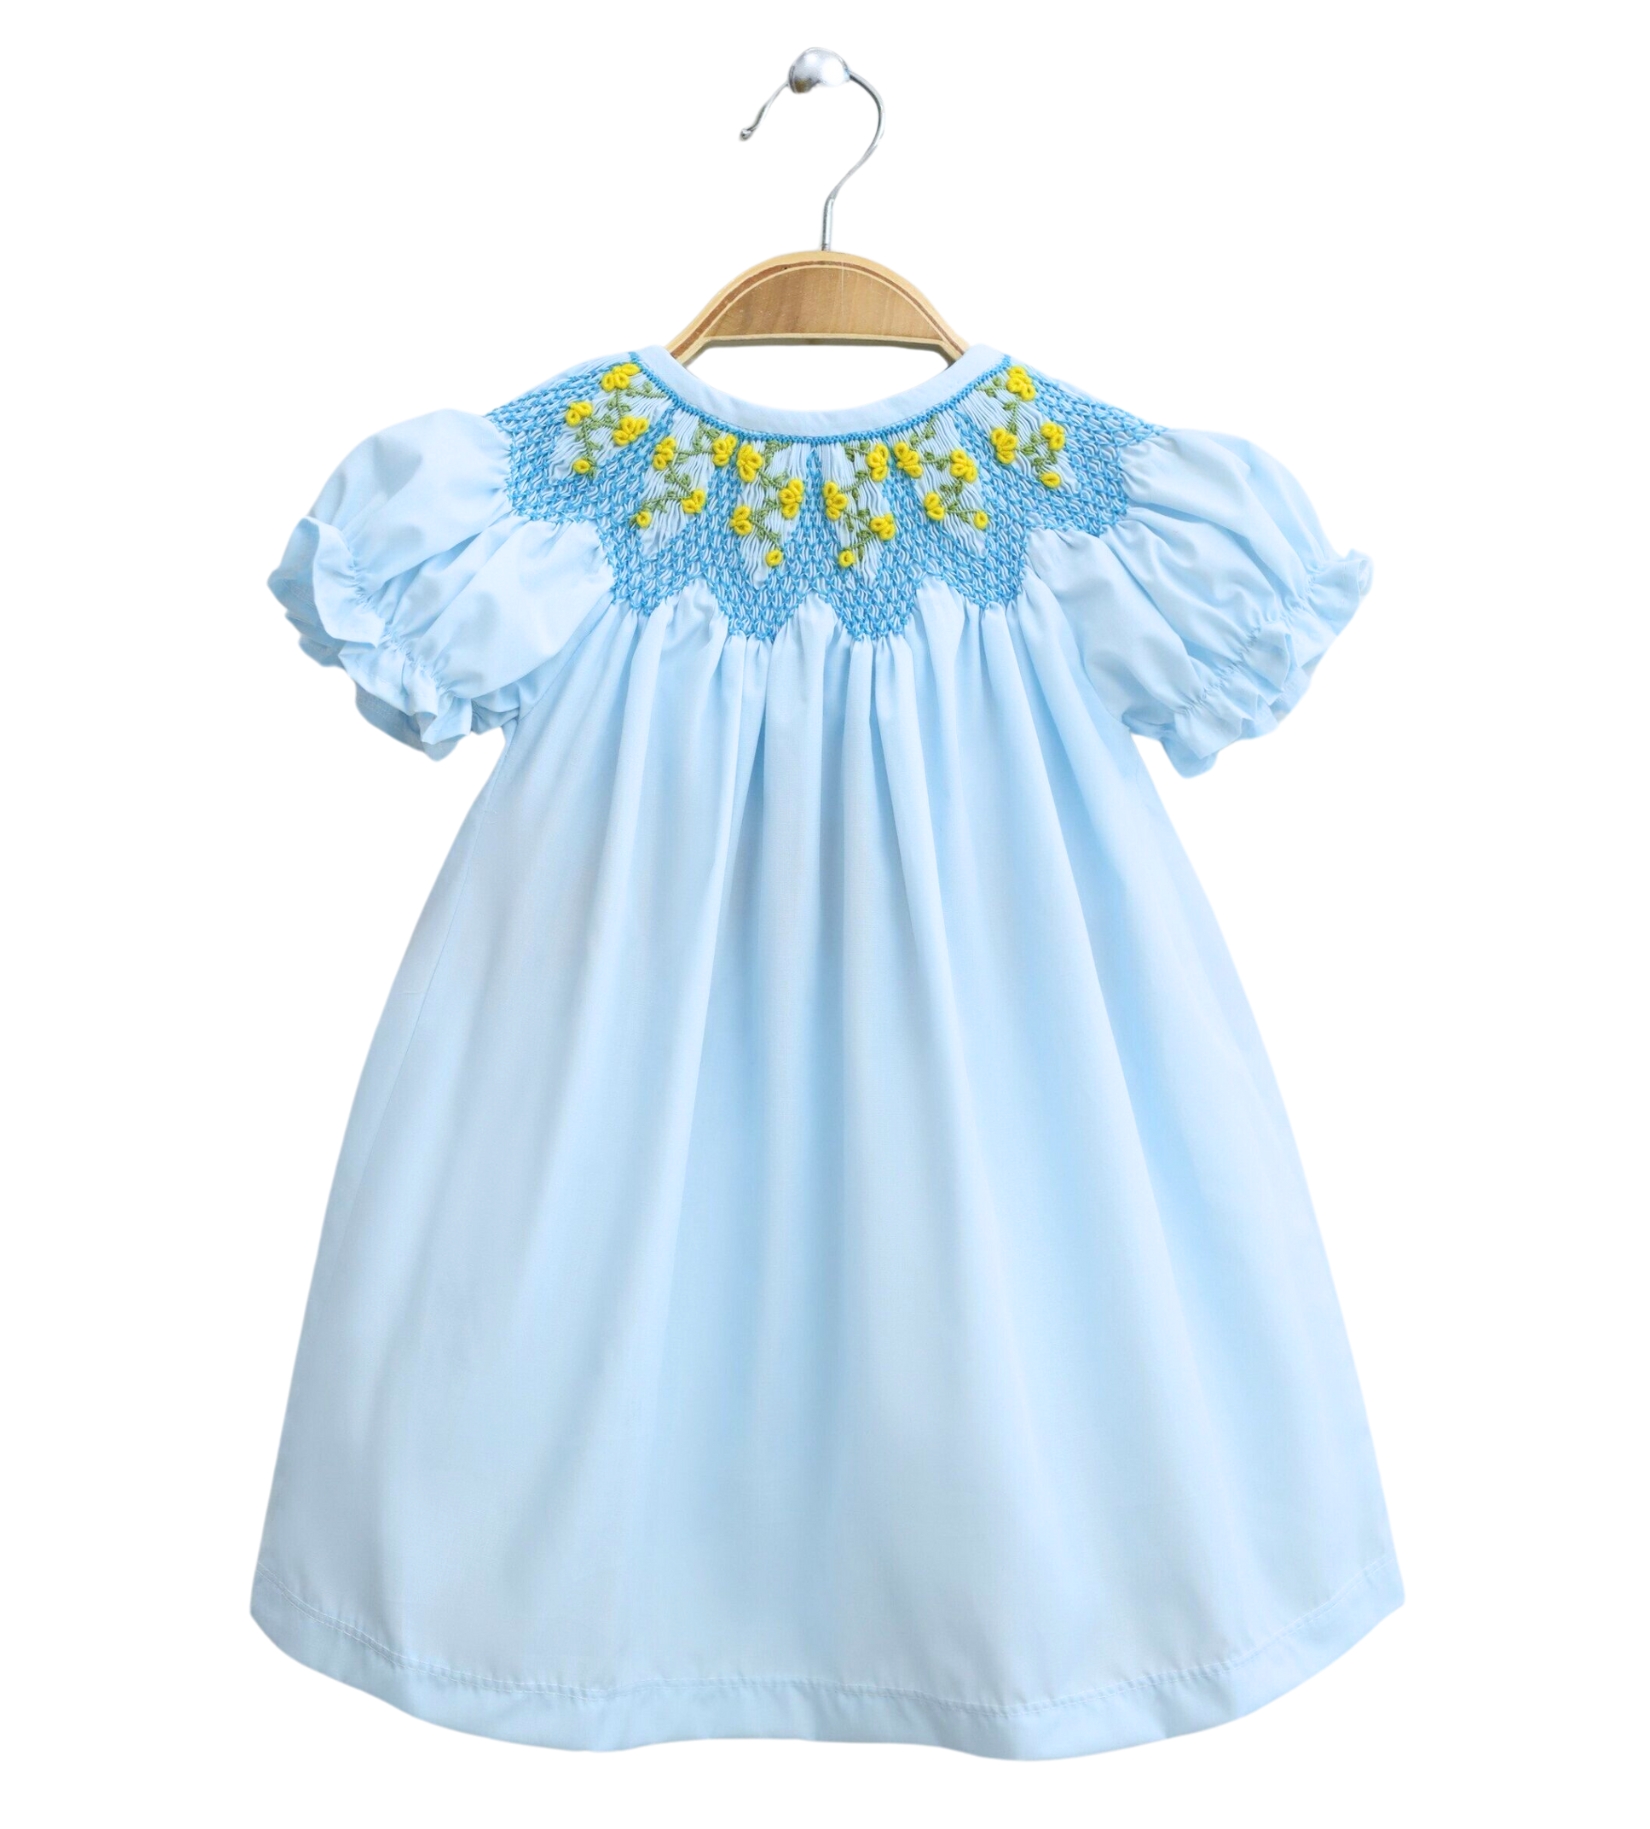 Blue Dress Embroidered With Chrysanthemums At The Collar